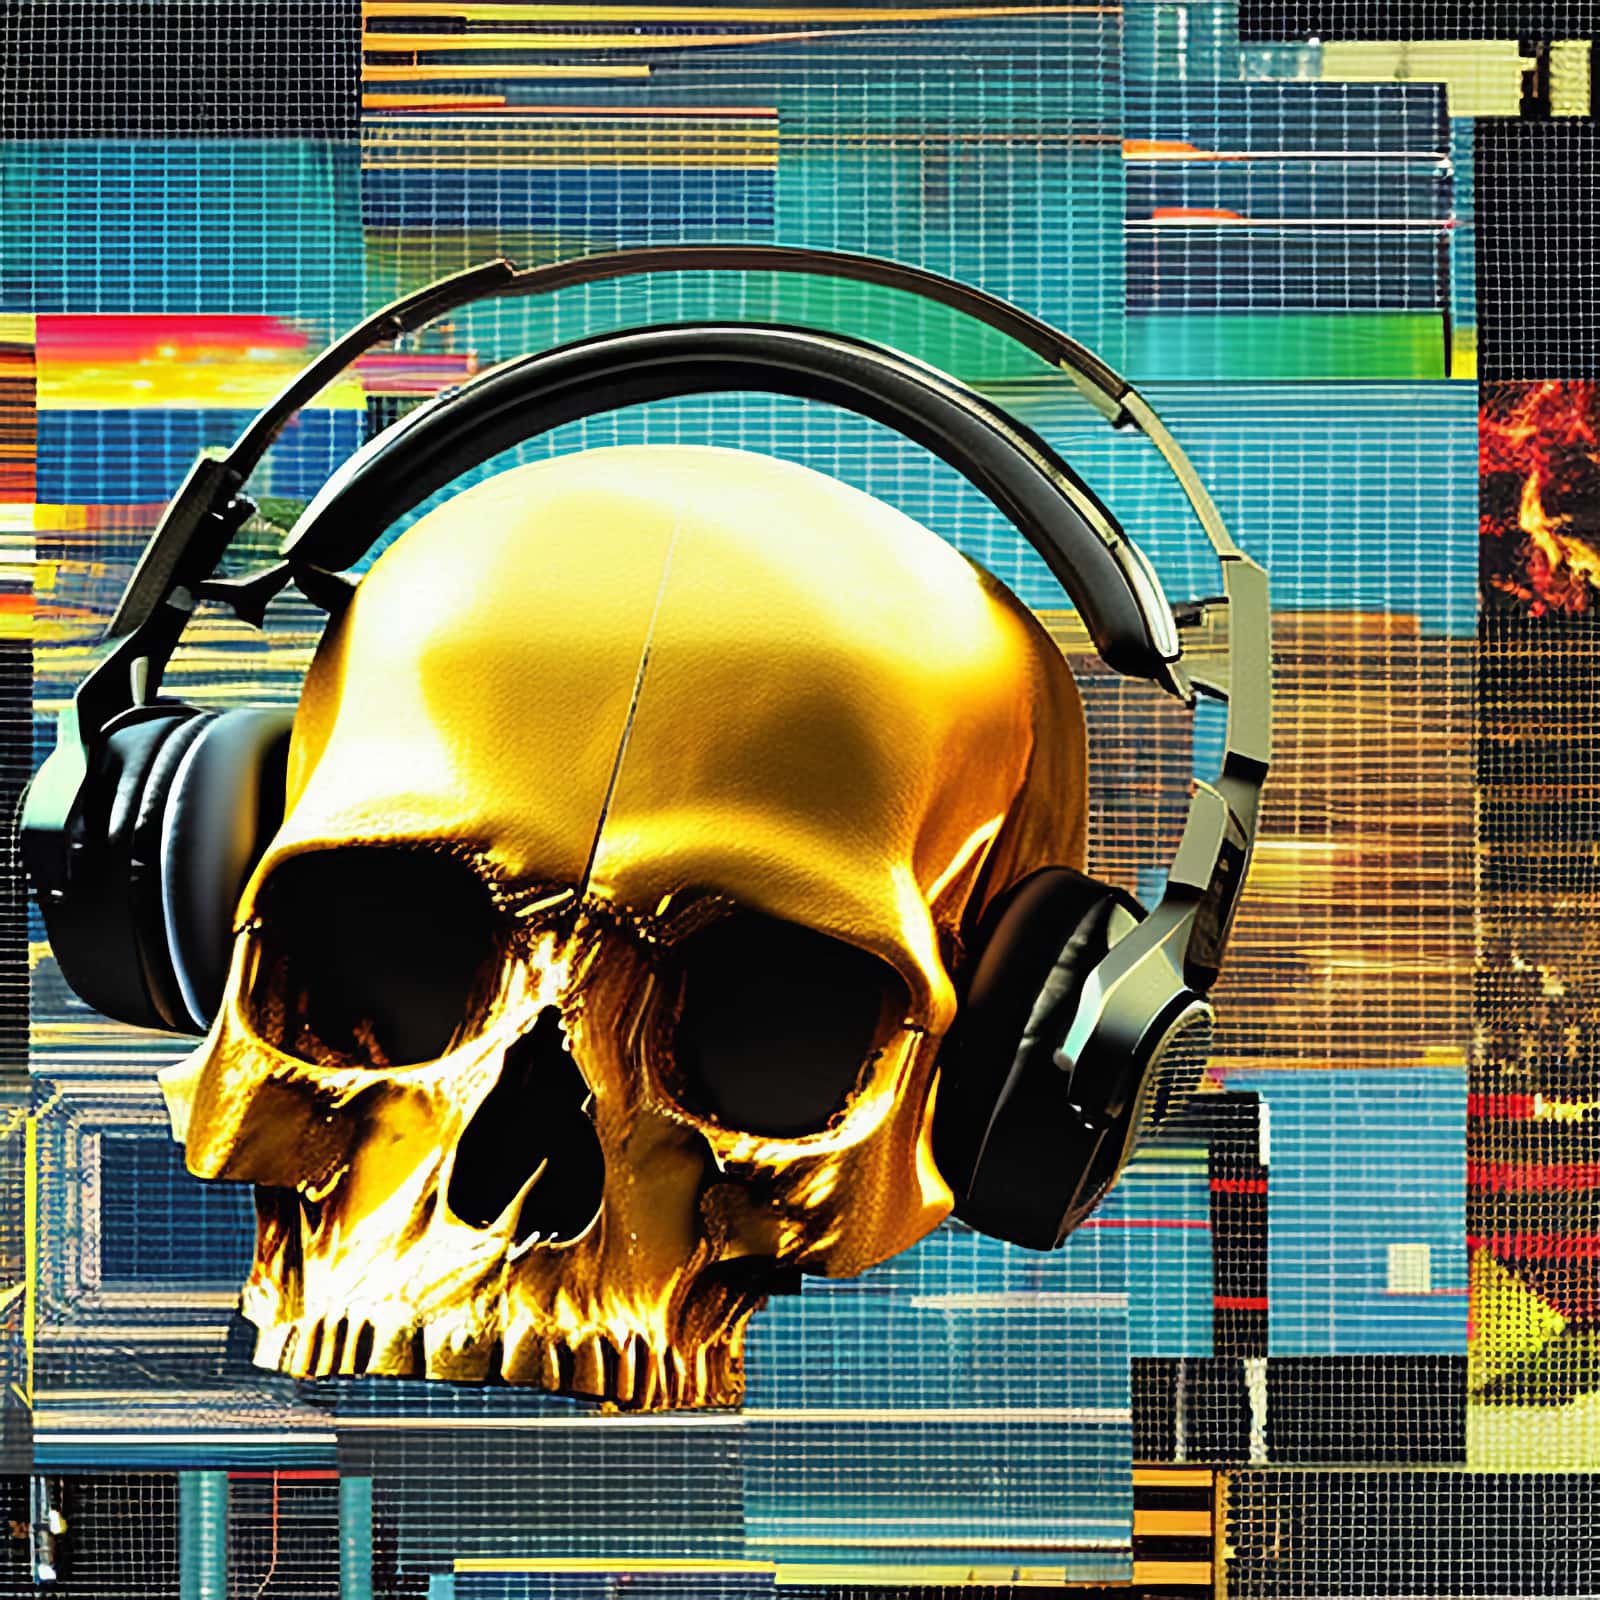 The Golden Skull, Radio Clash collage - Ghost In The Machine series, Artificial Intelligence AI